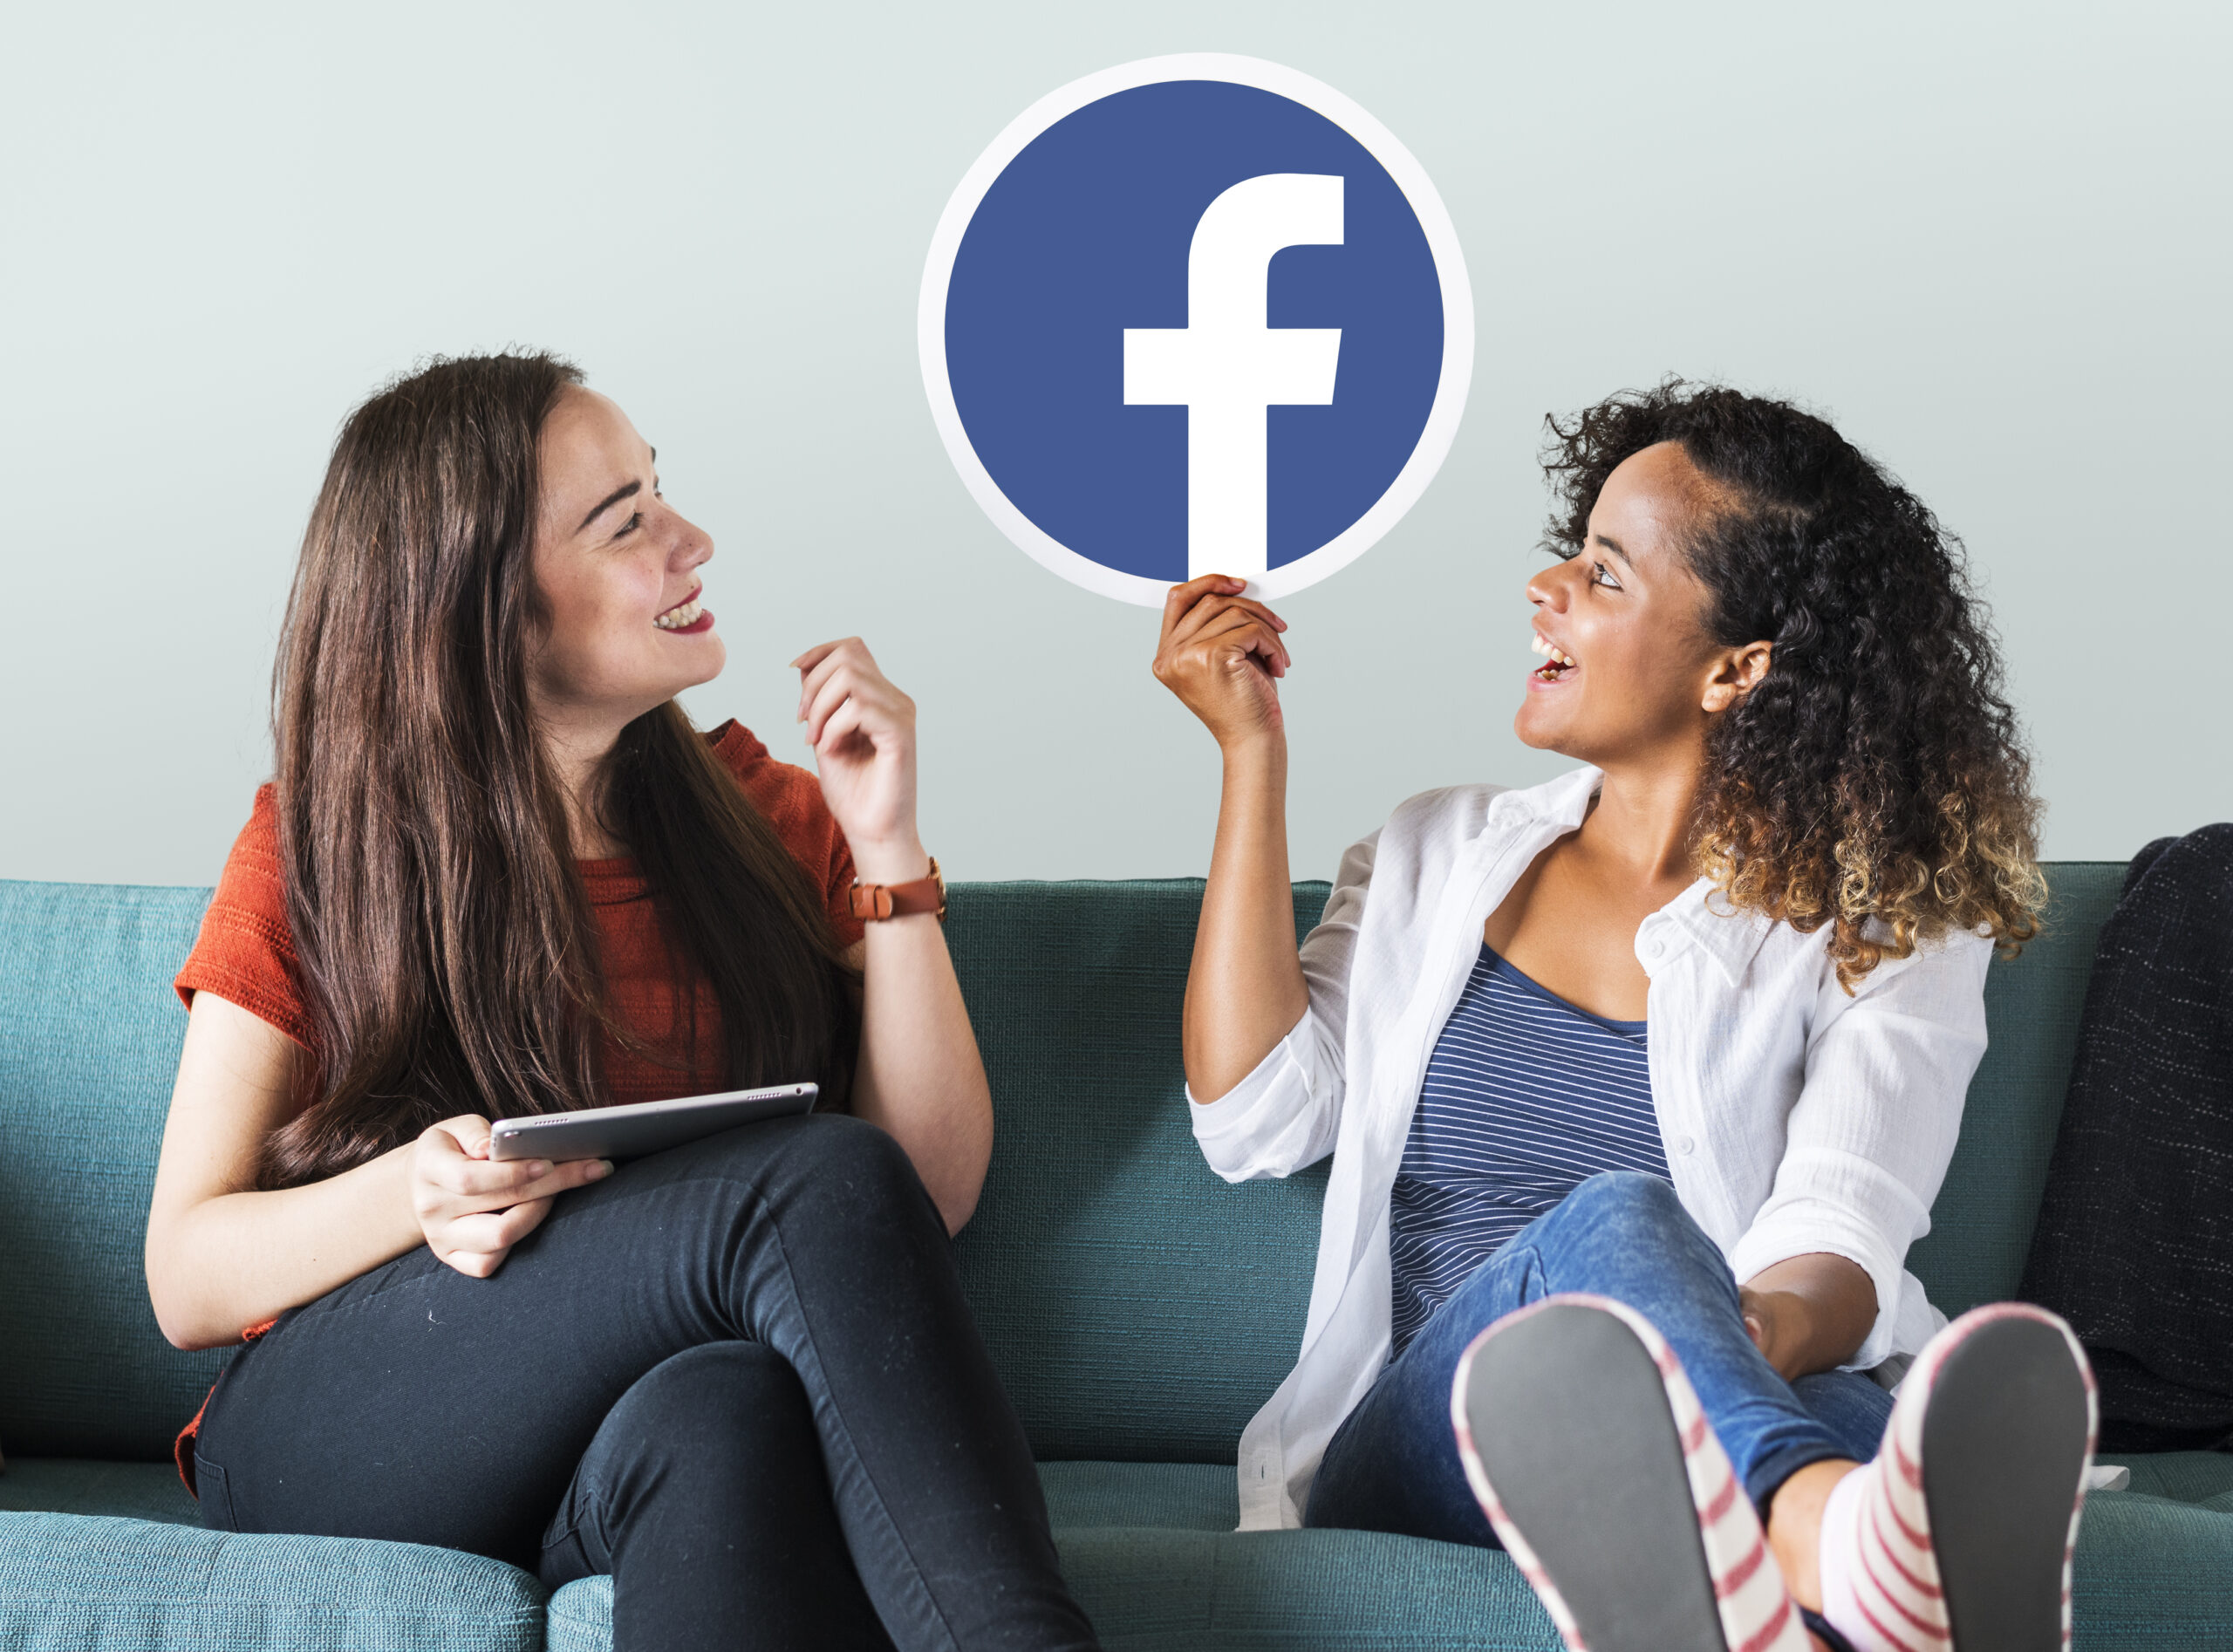 Two women laugh together as they scroll through Facebook